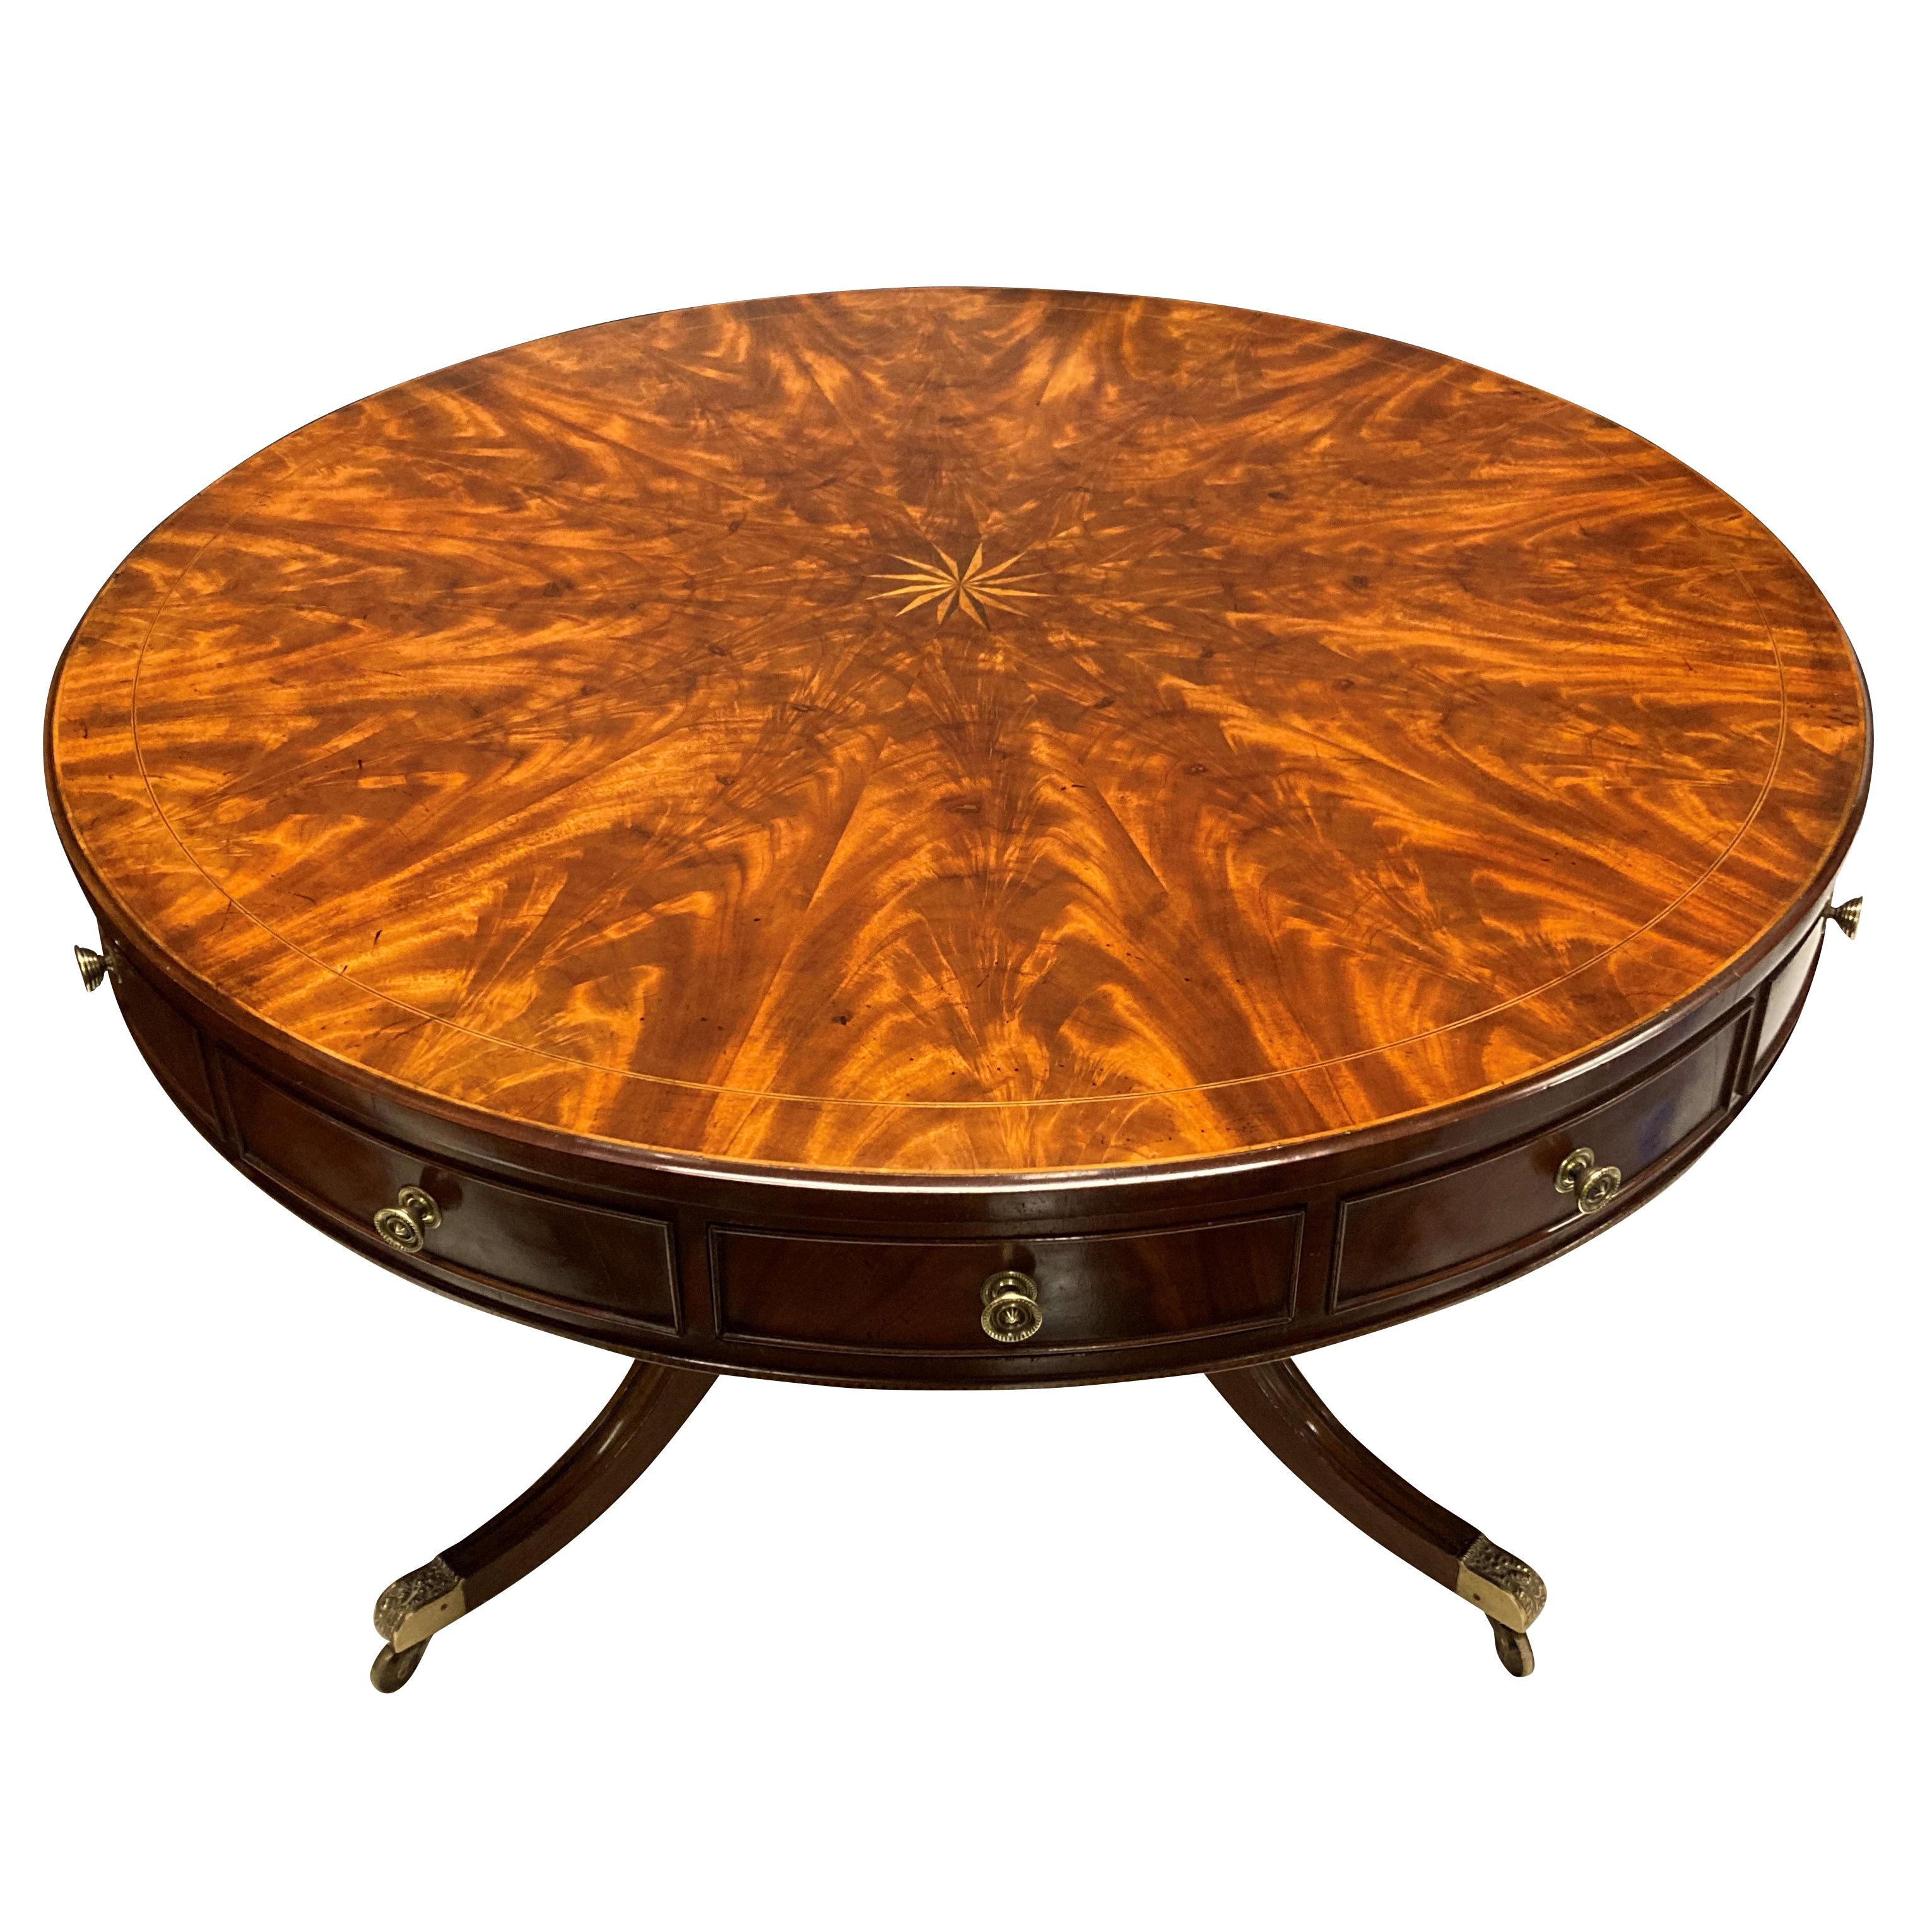 A large English drum table in the Regency style, with a segmented flame mahogany top, and twelve drawers beneath, eight of which are blind. Beneath, a fluted column supported by scrolled legs. The brass feet and drawer pulls have been cleaned.